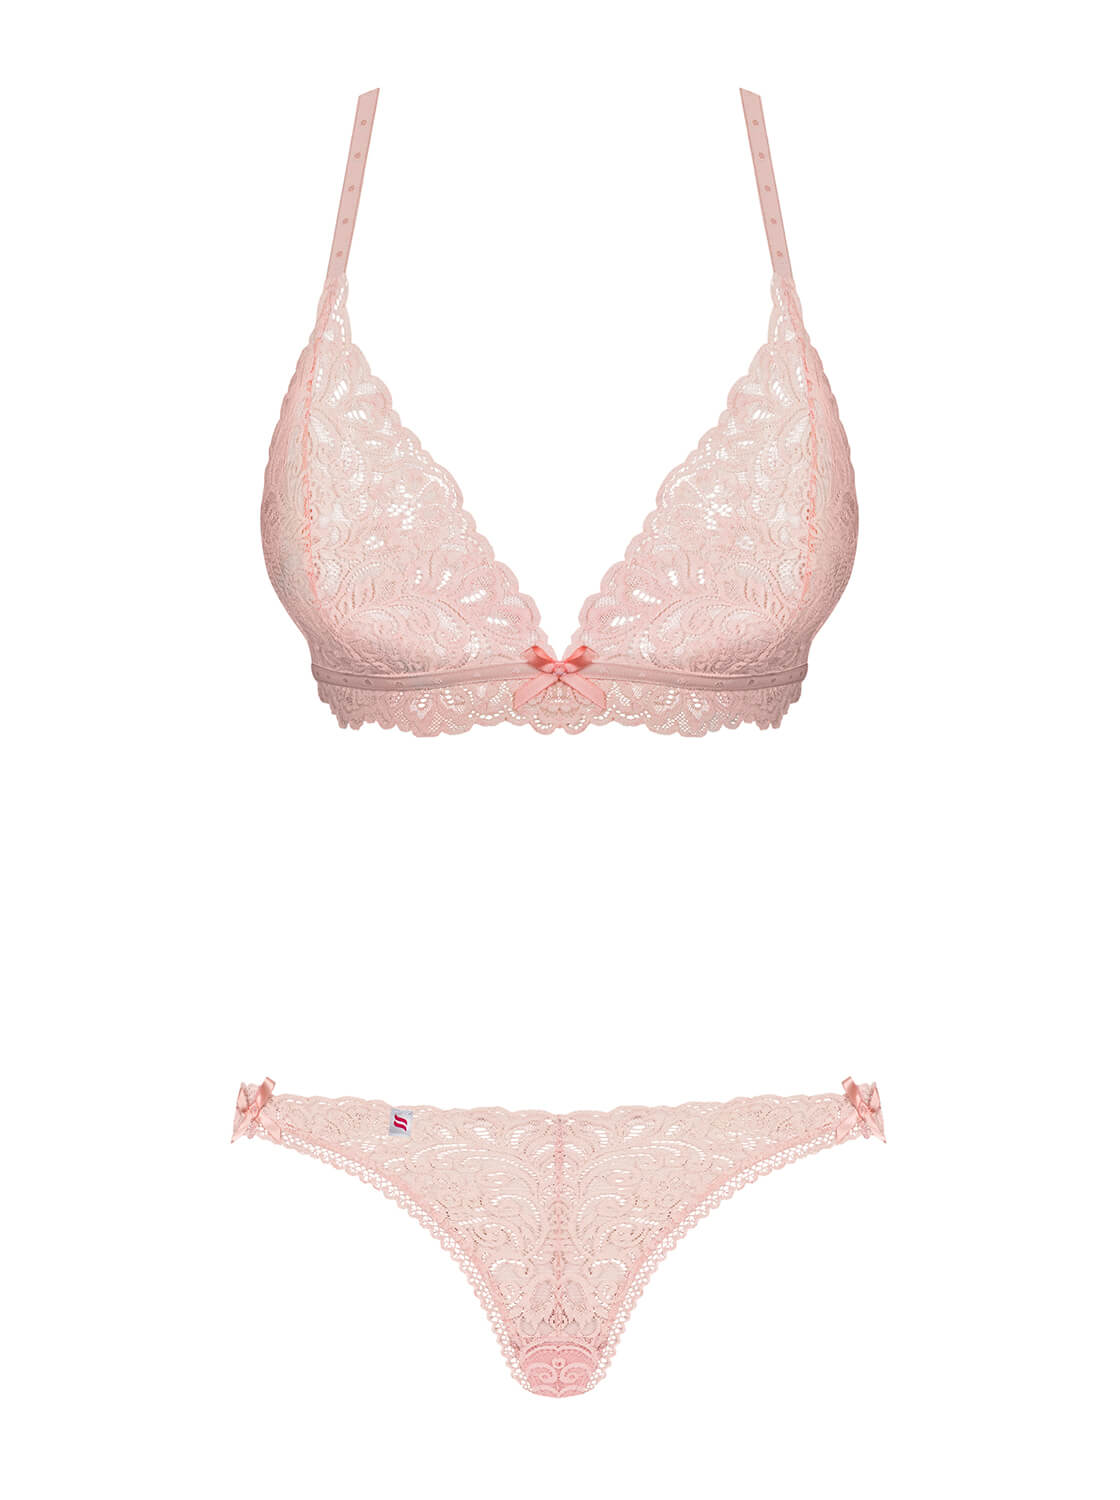 Delicanta Charming pink set of a bra with comfortable soft cups and matching lace panties with ComfyCut cut